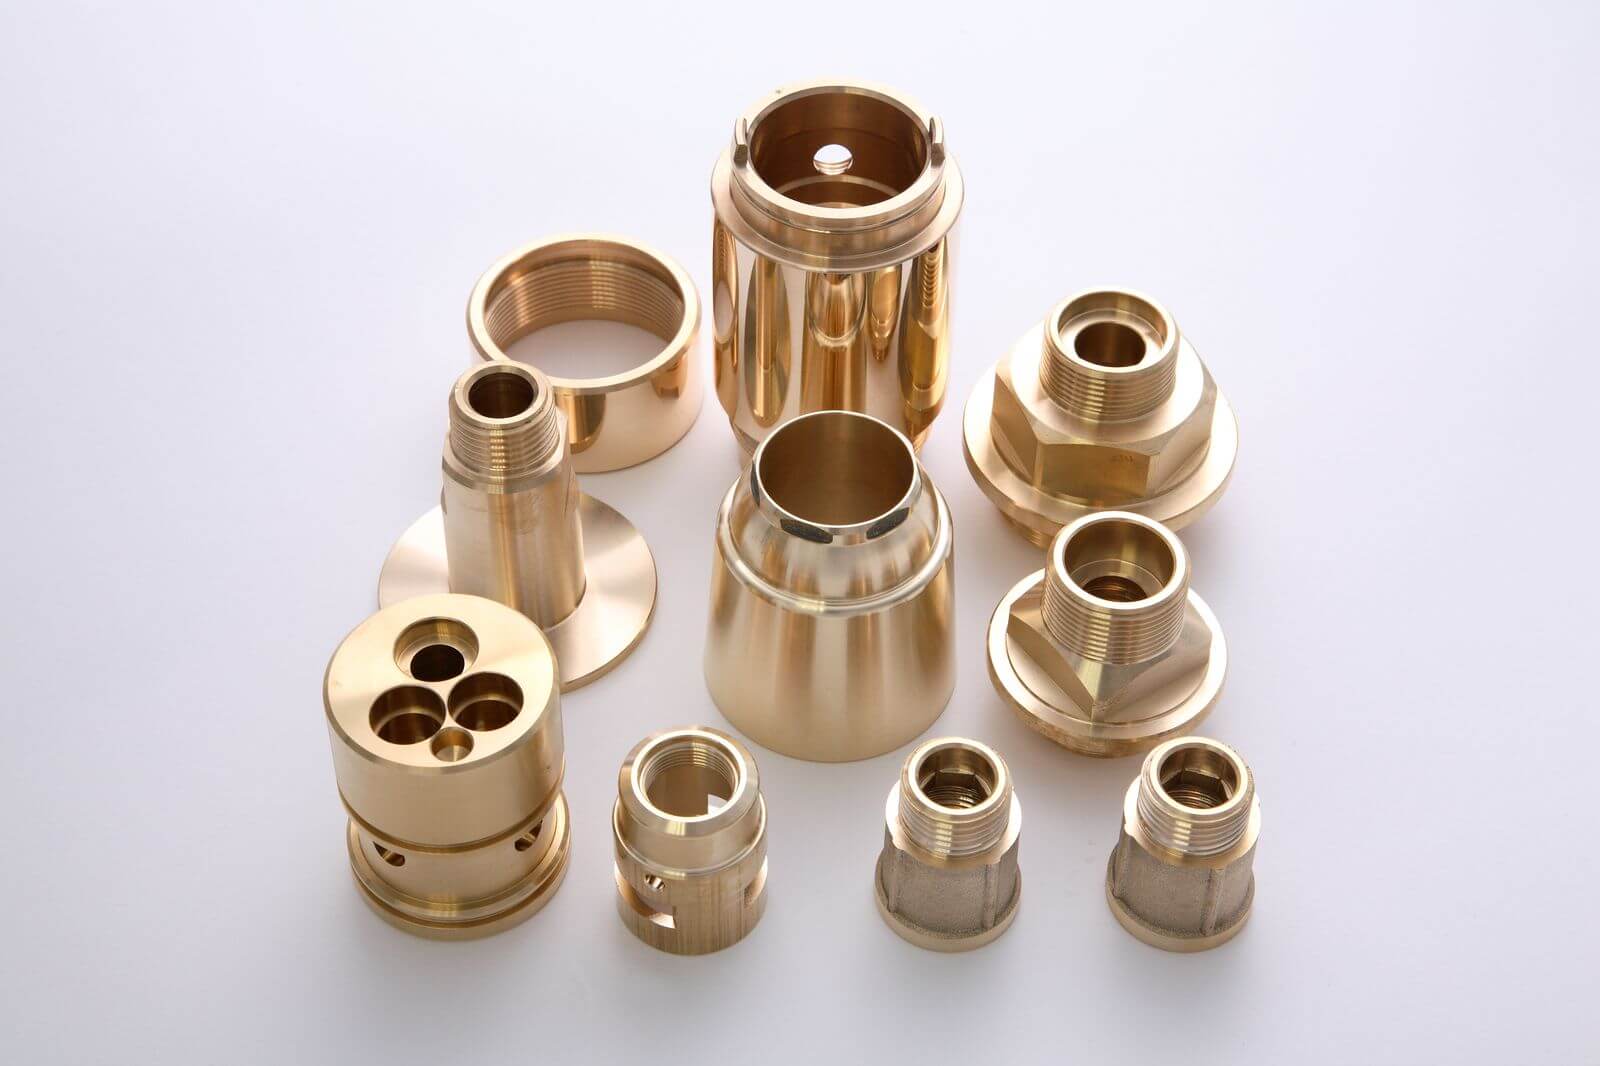 Copper vs. Brass: Which material is best for machined parts?